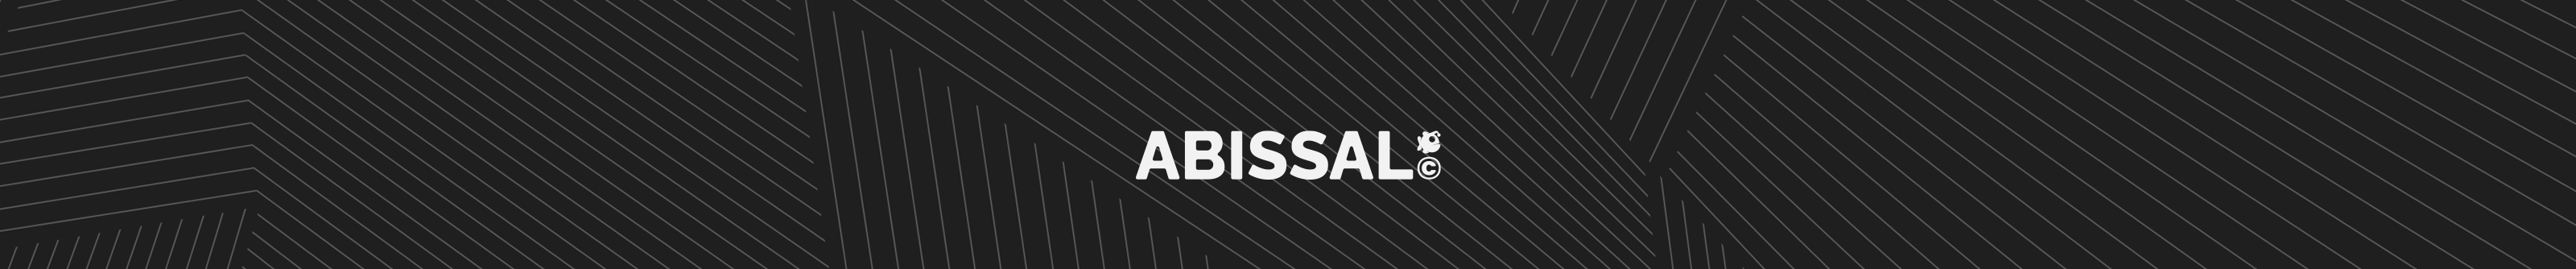 Abissal Brands's profile banner